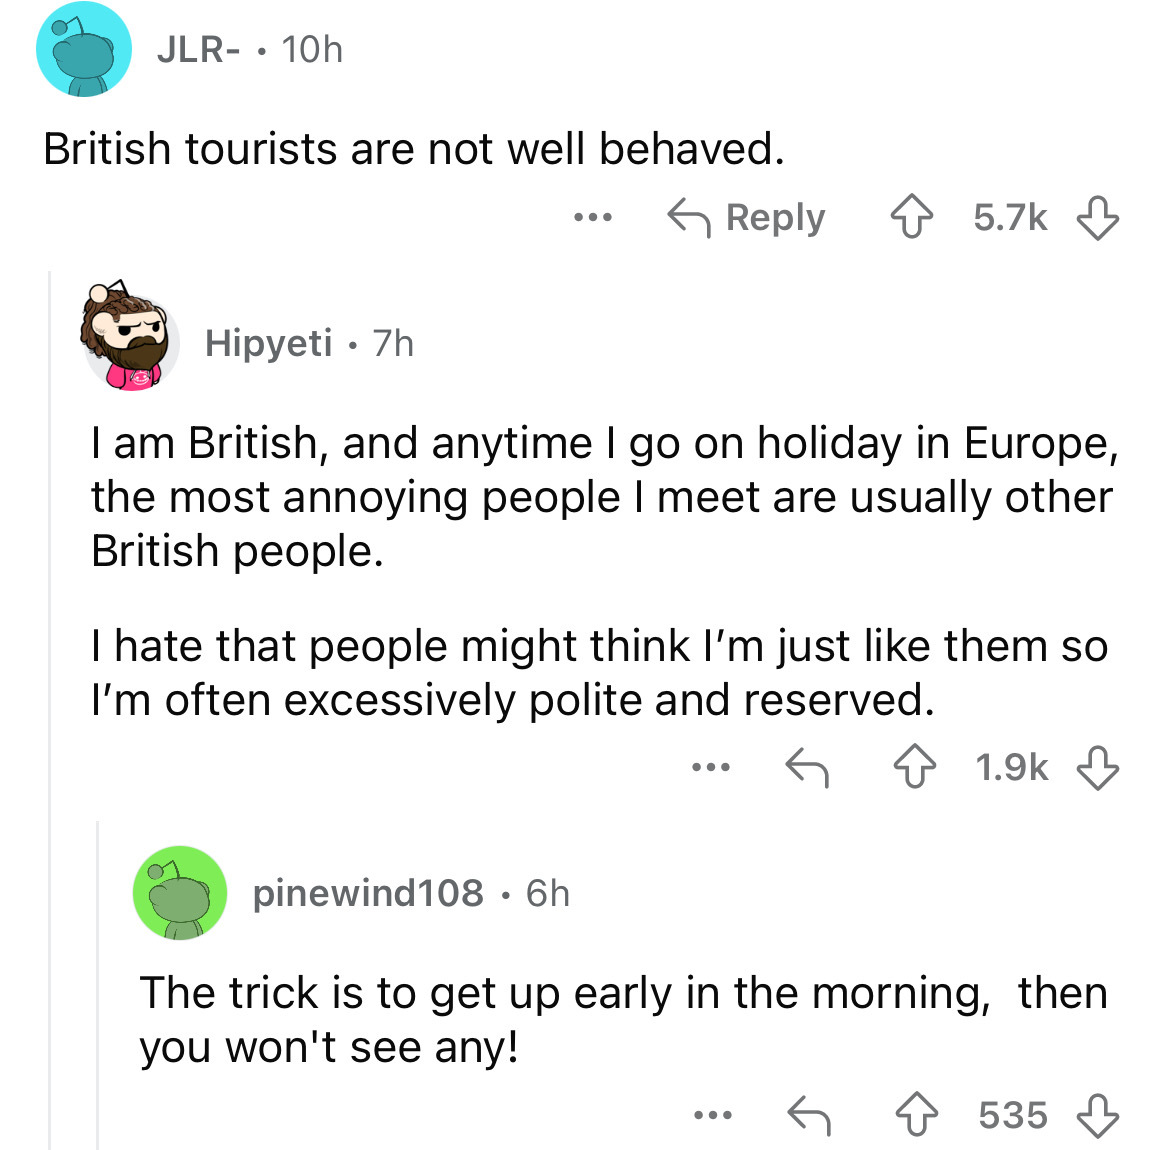 screenshot - Jlr 10h British tourists are not well behaved. Hipyeti .7h ... I am British, and anytime I go on holiday in Europe, the most annoying people I meet are usually other British people. I hate that people might think I'm just them so I'm often ex